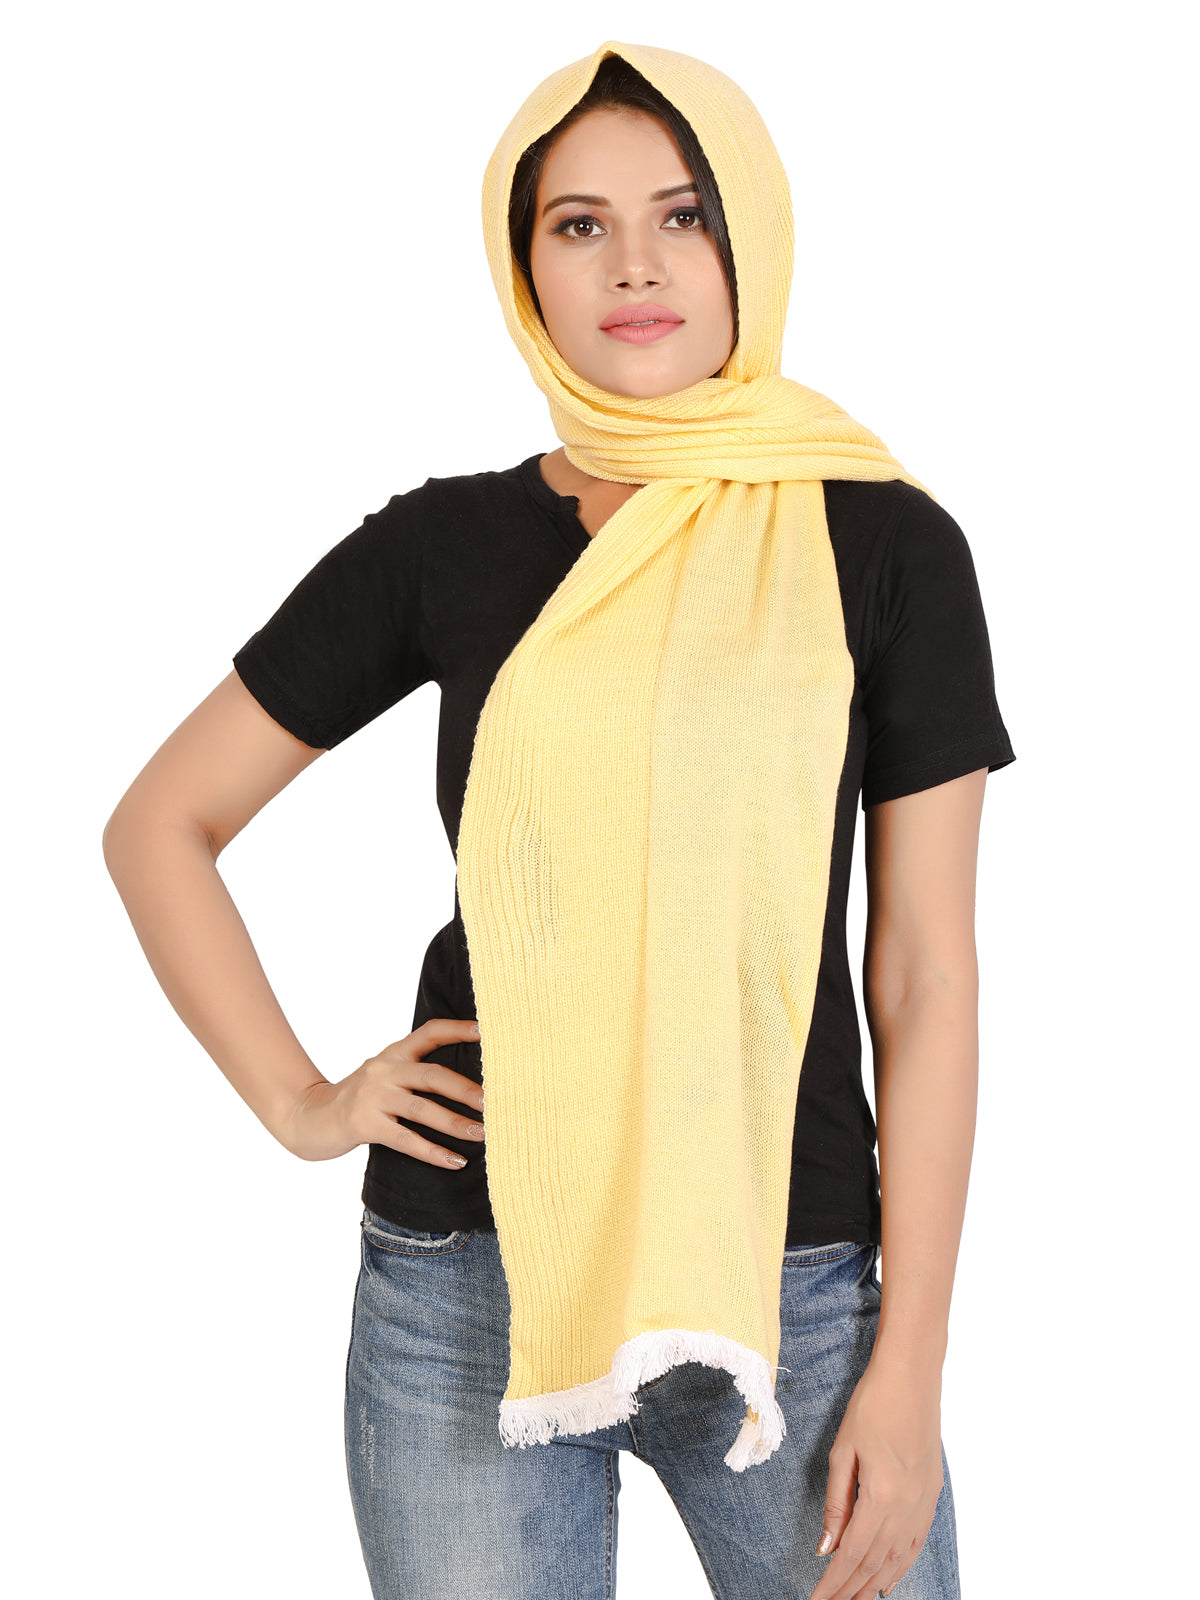 Girls' Free Size Scarf - Yellow Color